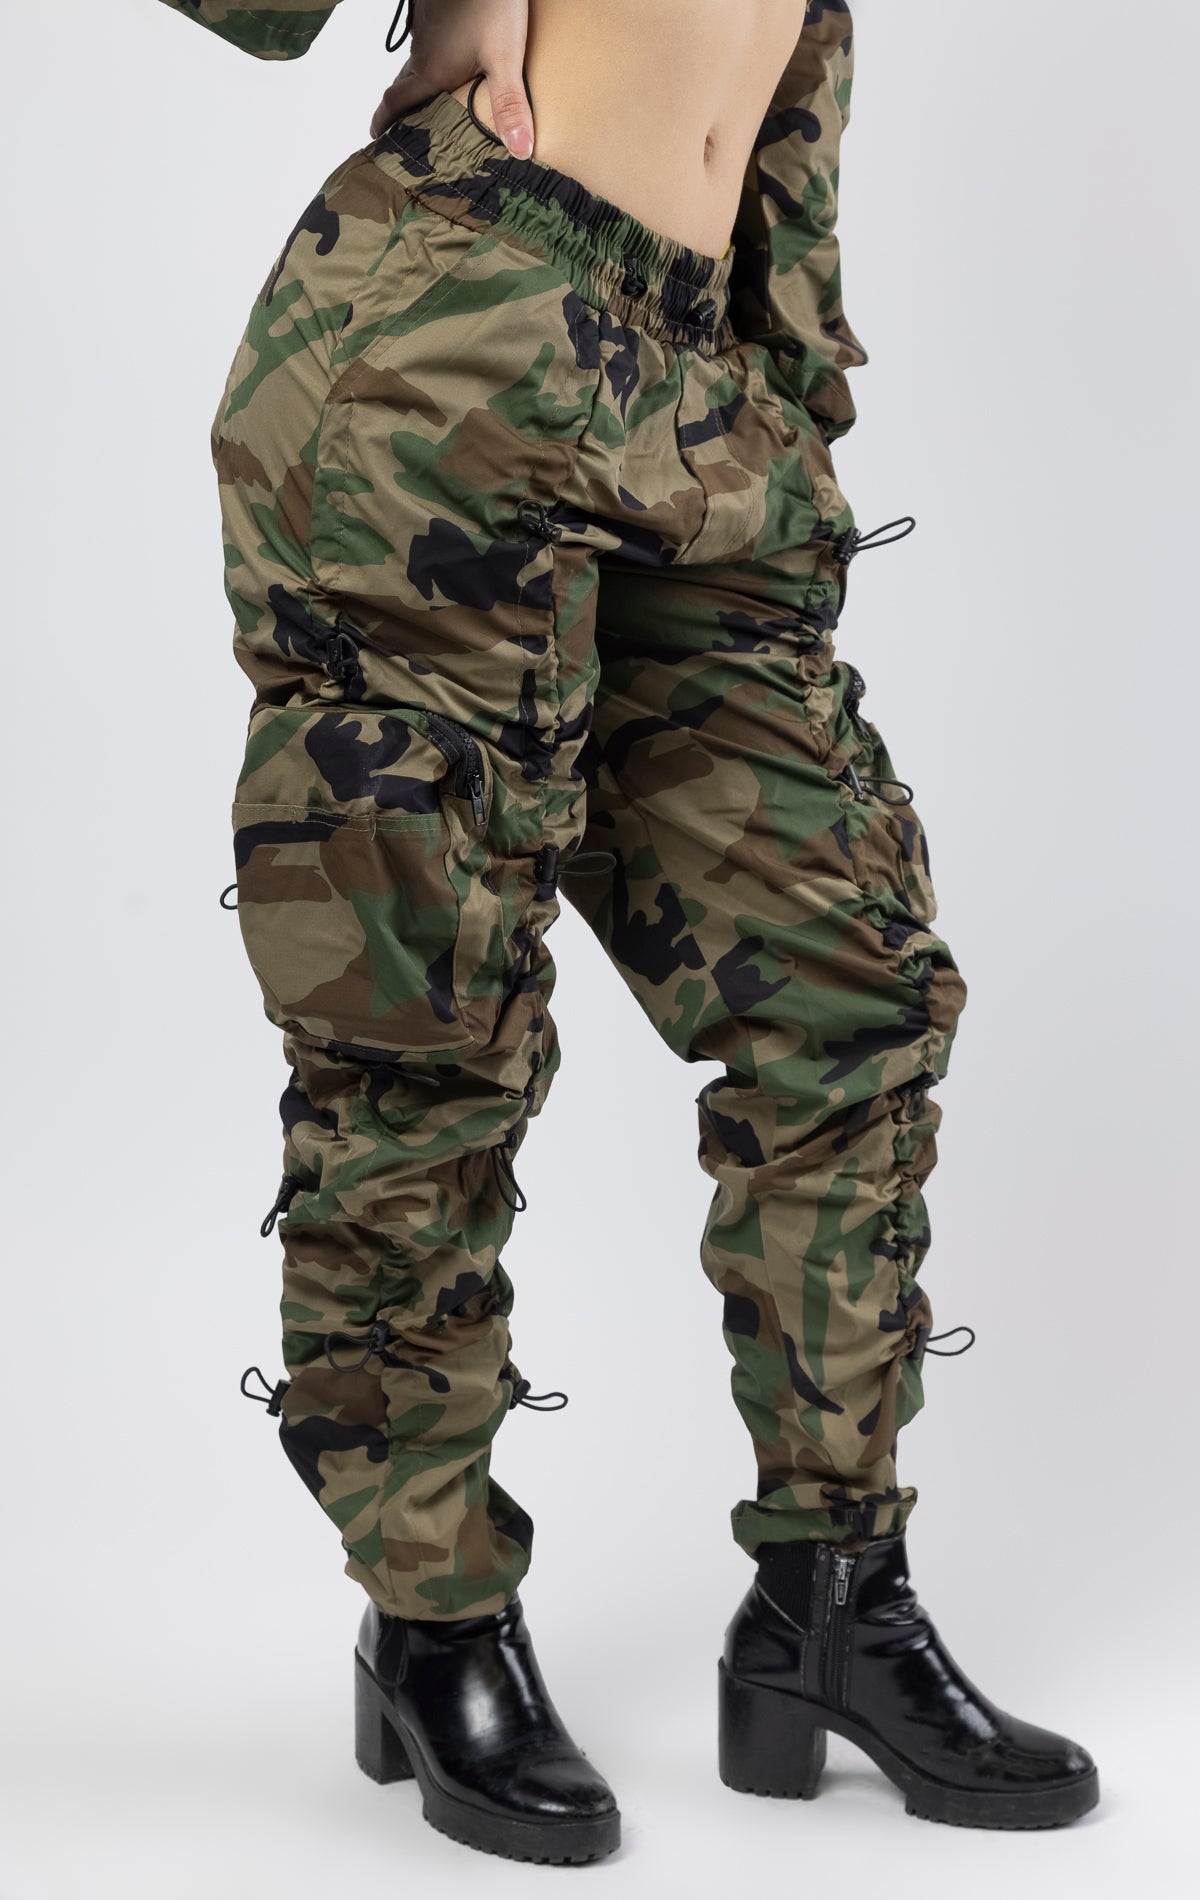 Wood Camo multi-bungee jogger featuring a Brook fit, snap buttons, an adjustable waist and wide pockets.